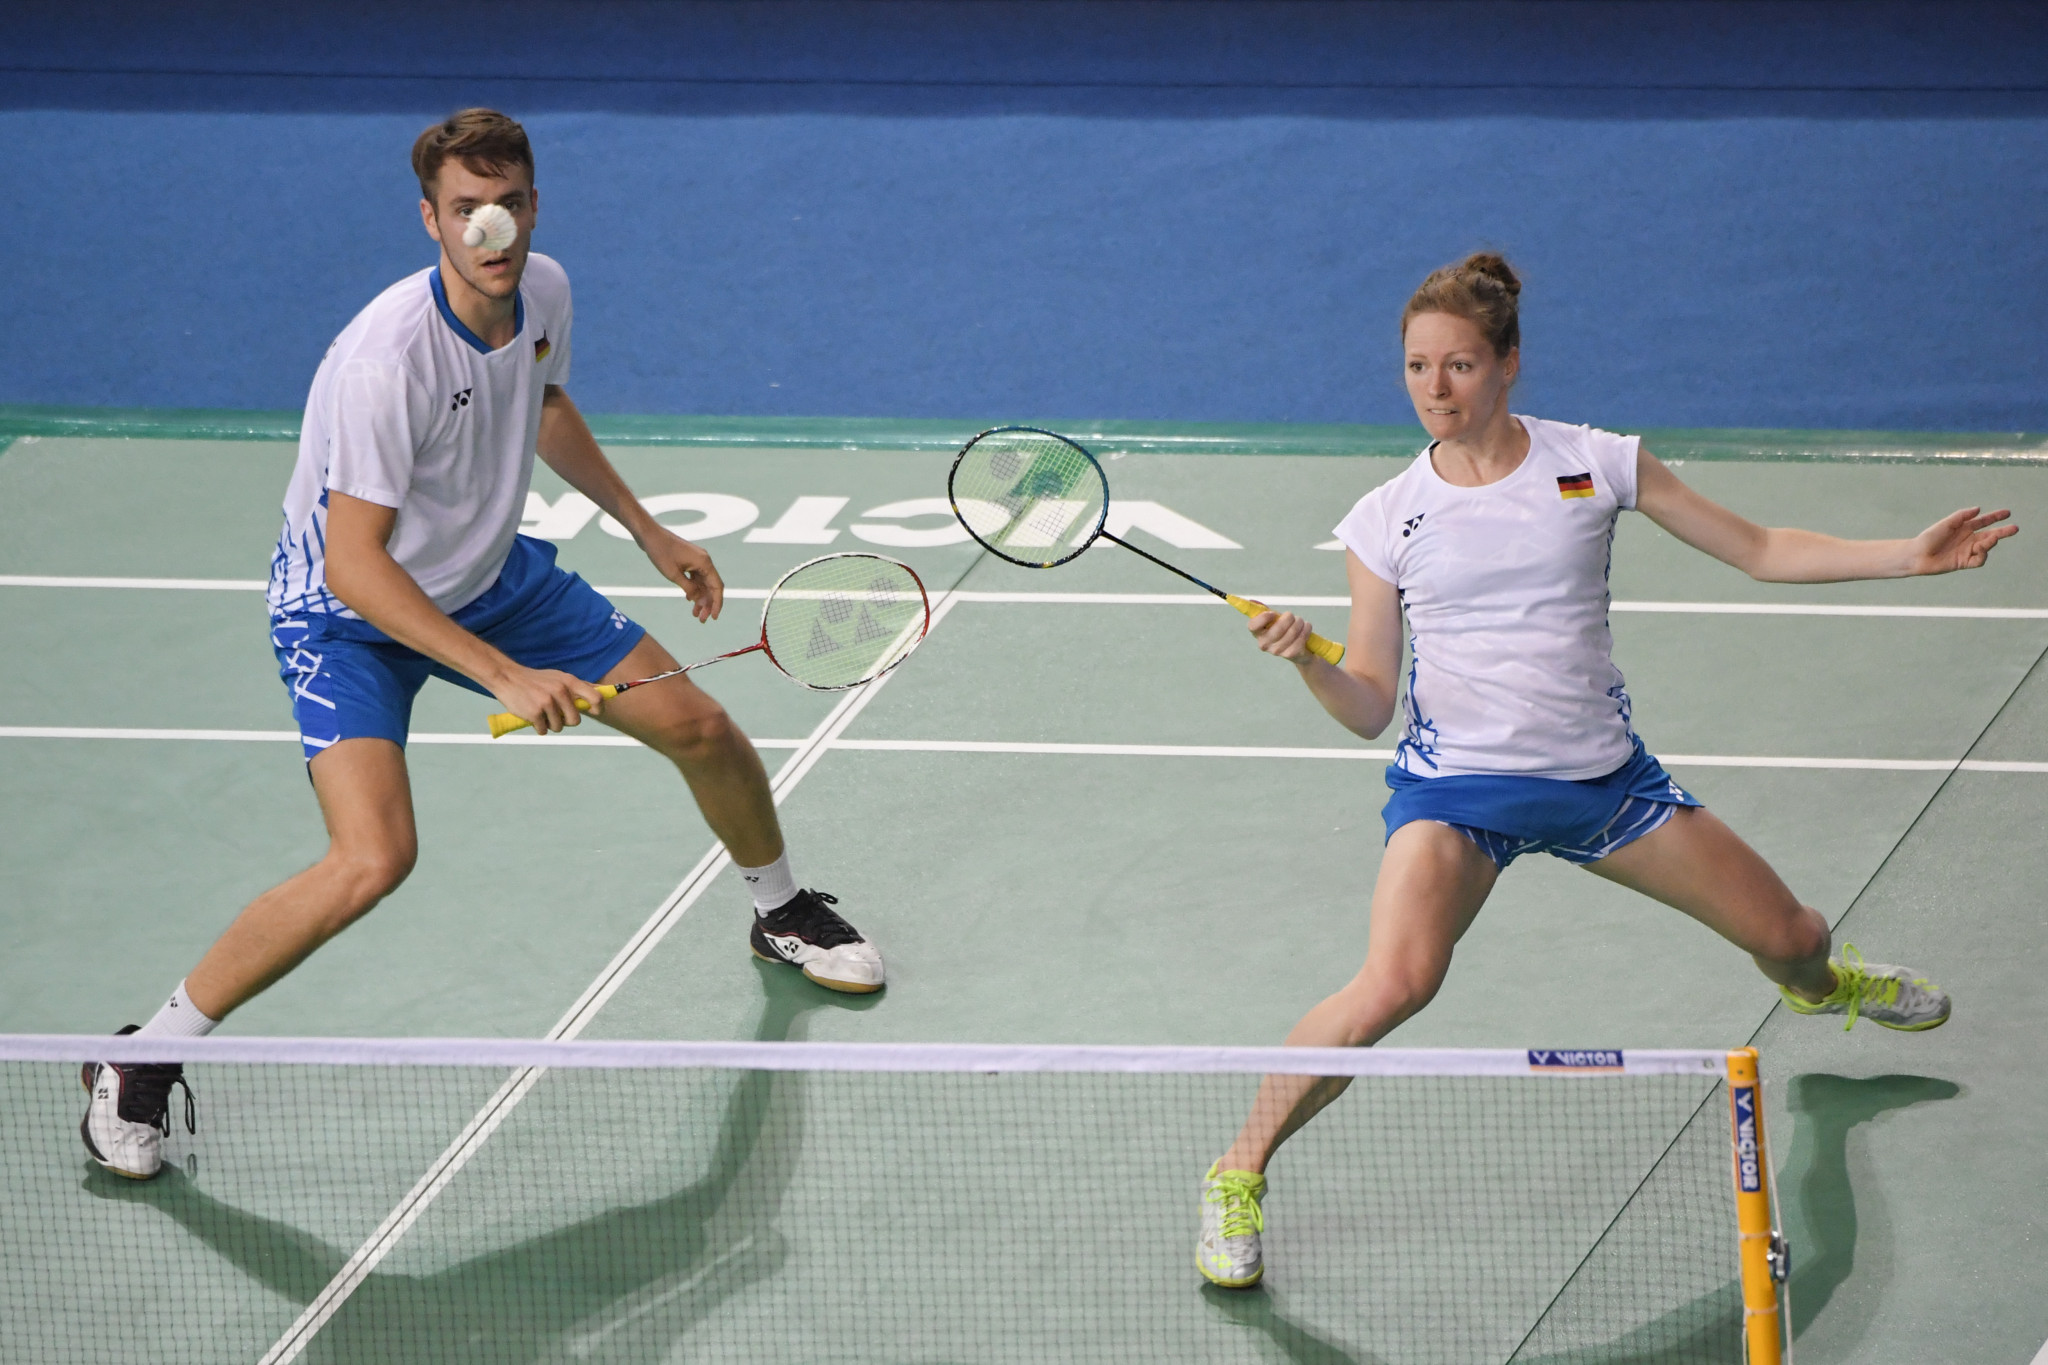 Top mixed doubles seeds too strong for 62-year-old opponent as BWF US Open begins